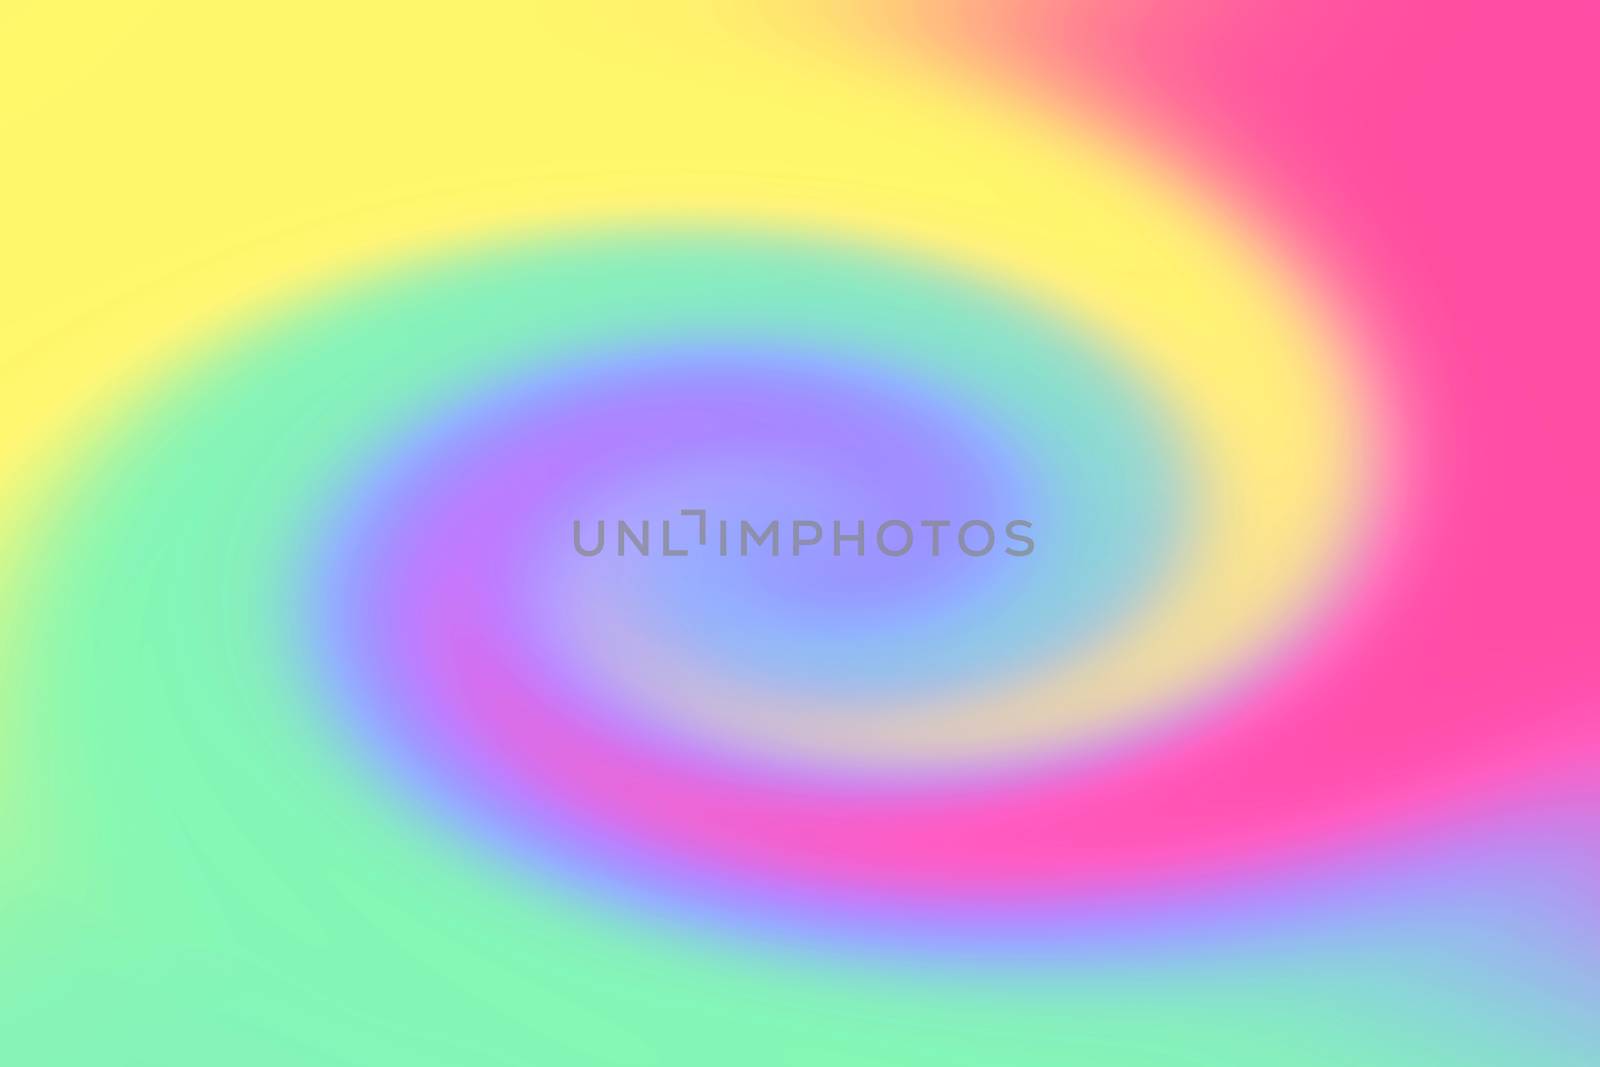 blurred twist colorful bright gradient, rainbow colorful light swirl wave effect background, colorful gradient soft wallpaper sweet swirl rainbow